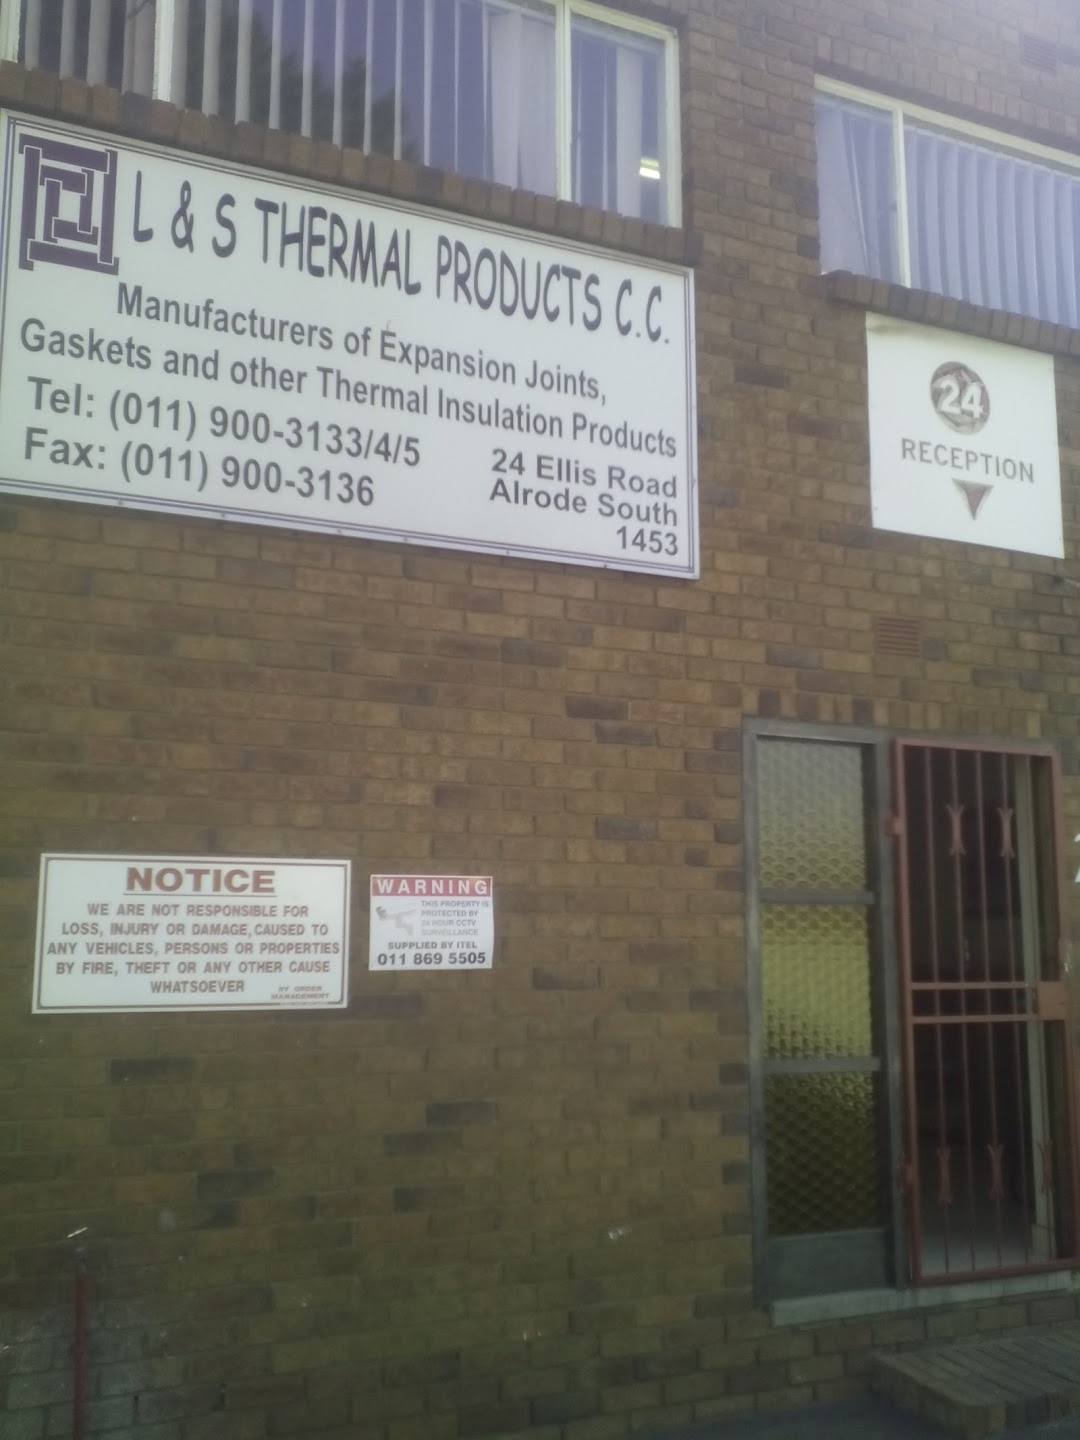 L & S Thermal Products c.c